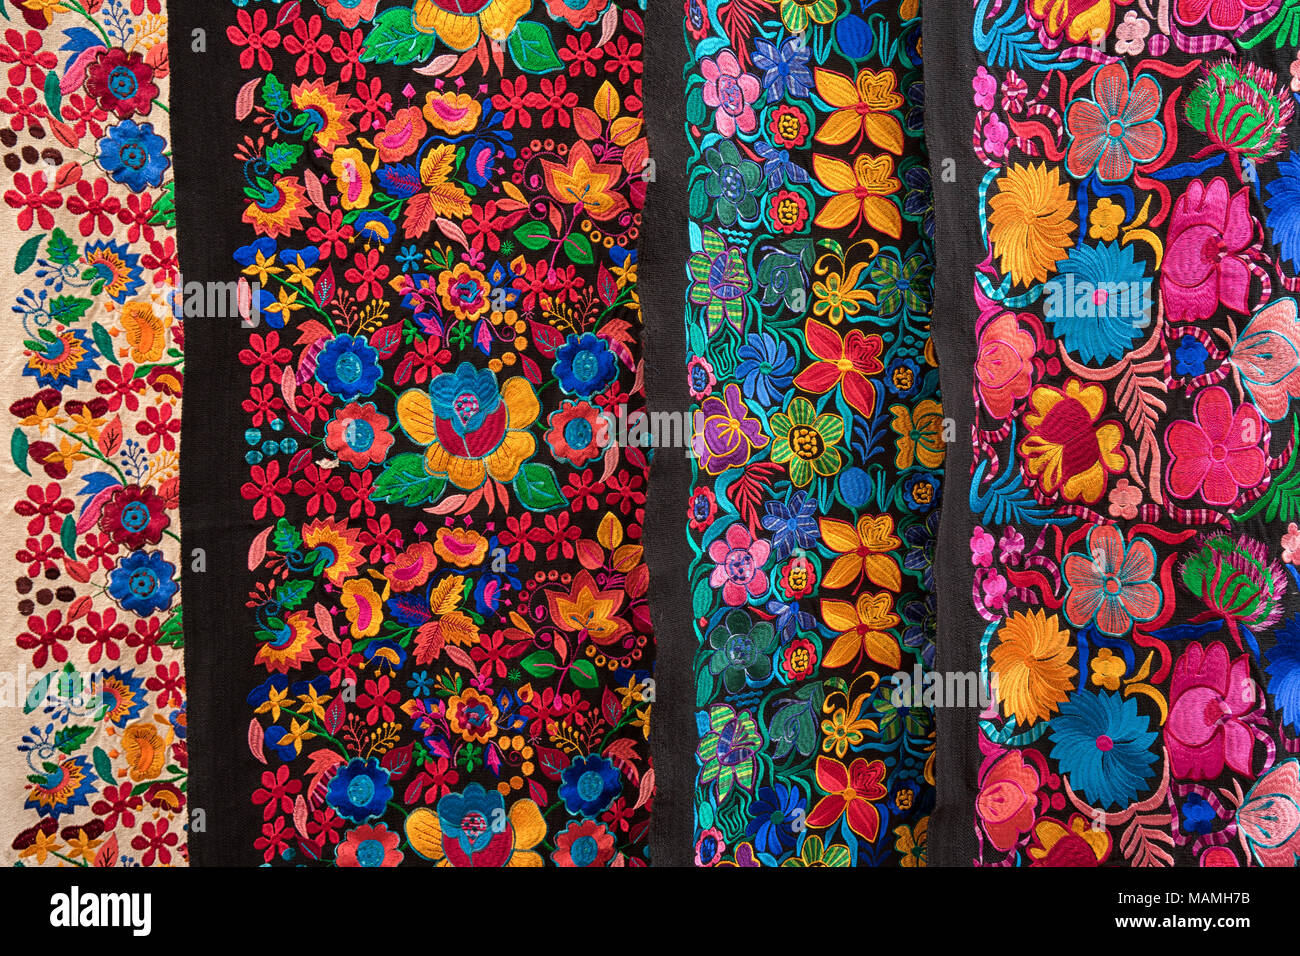 Otavalo, Ecuador-March 17, 2018: colourful indigenous textiles on display in the weekly artisan market Stock Photo